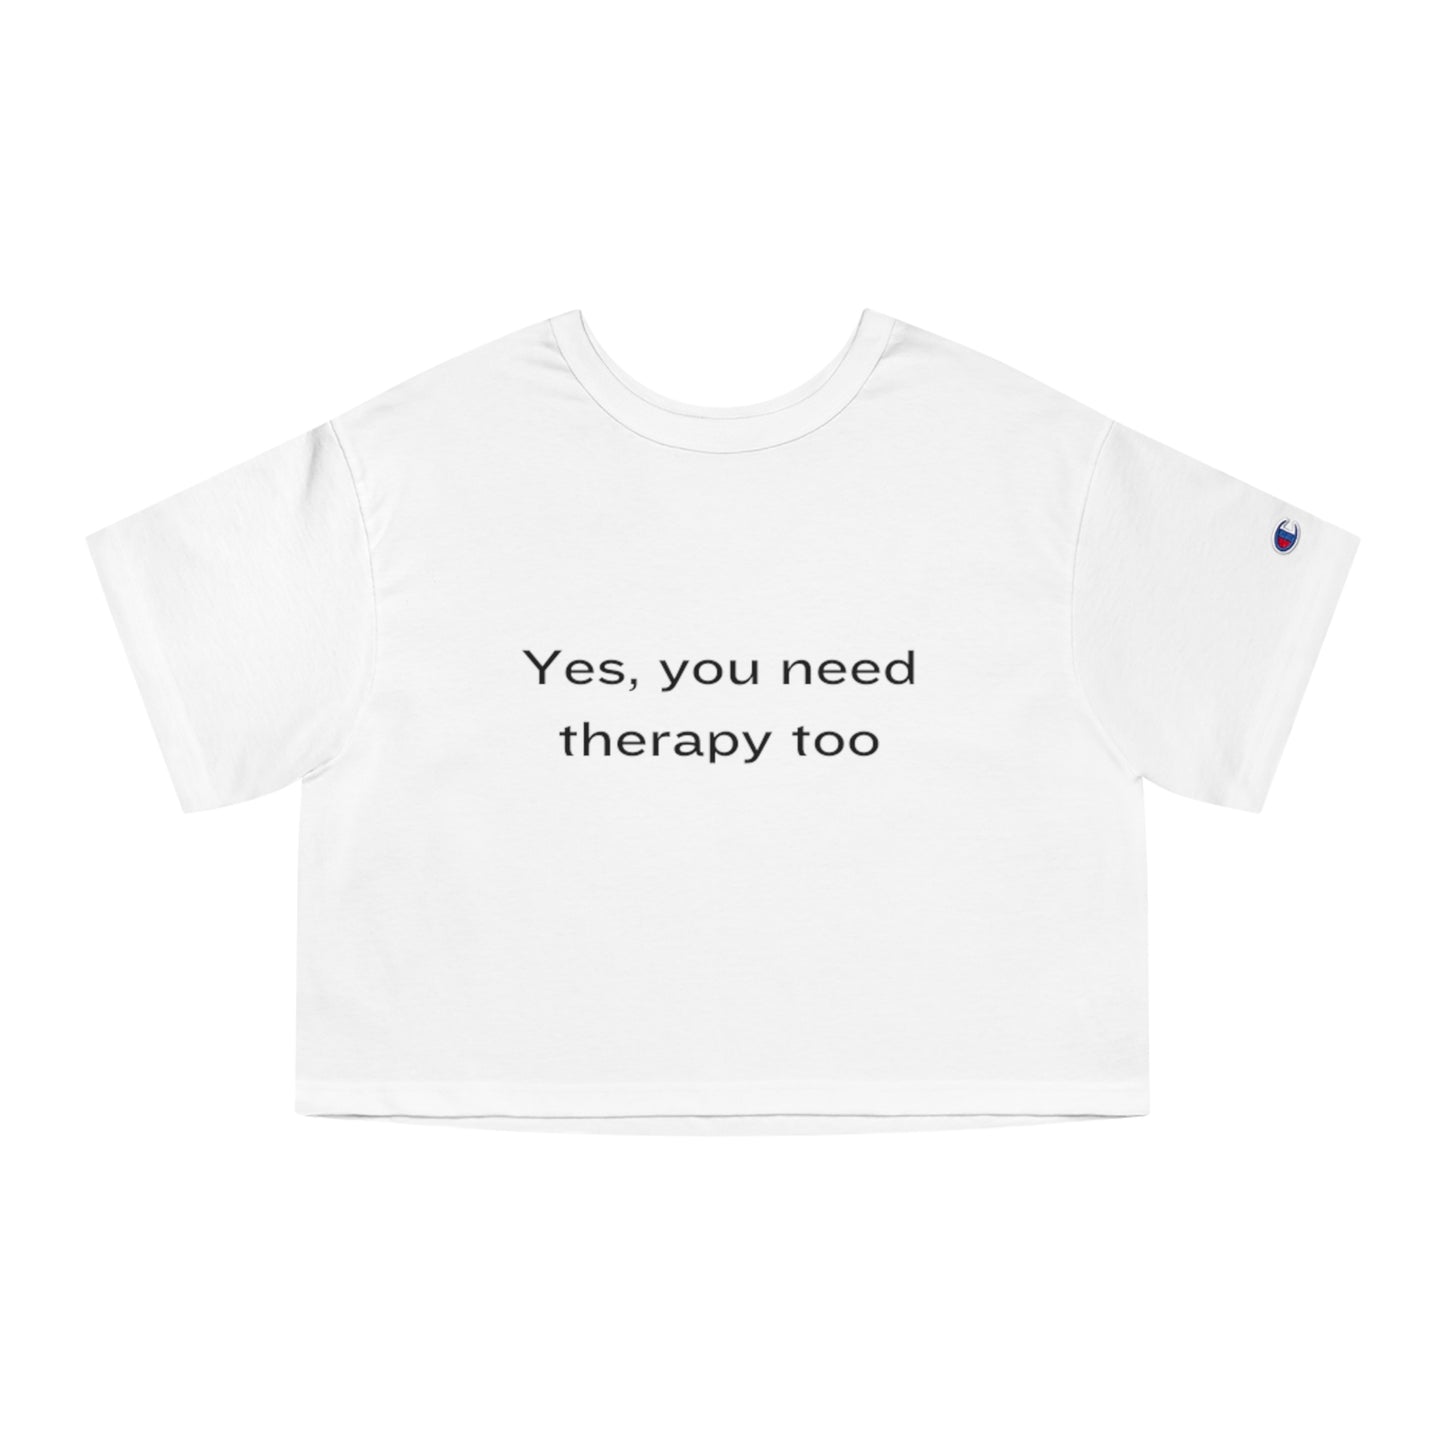 "Yes, you need therapy too" - Champion crop top